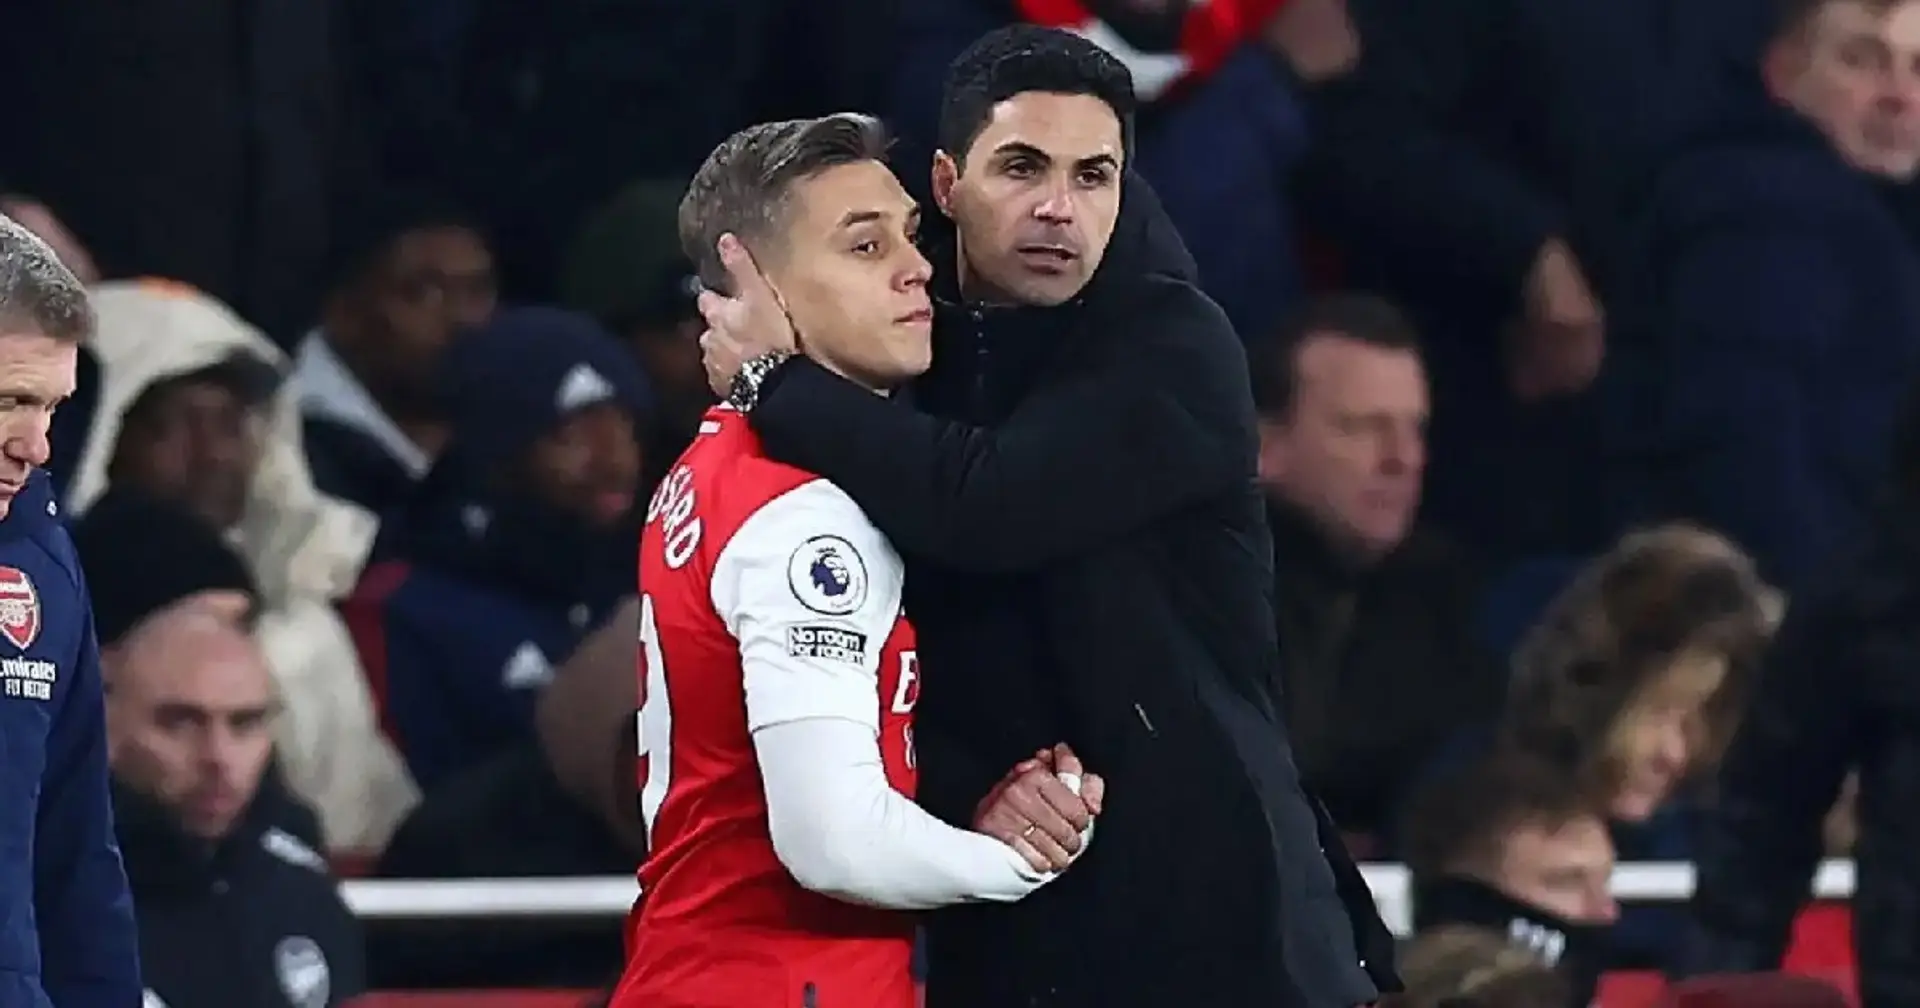 Arteta says Trossard and one other Arsenal player can change momentum of games - not Saka